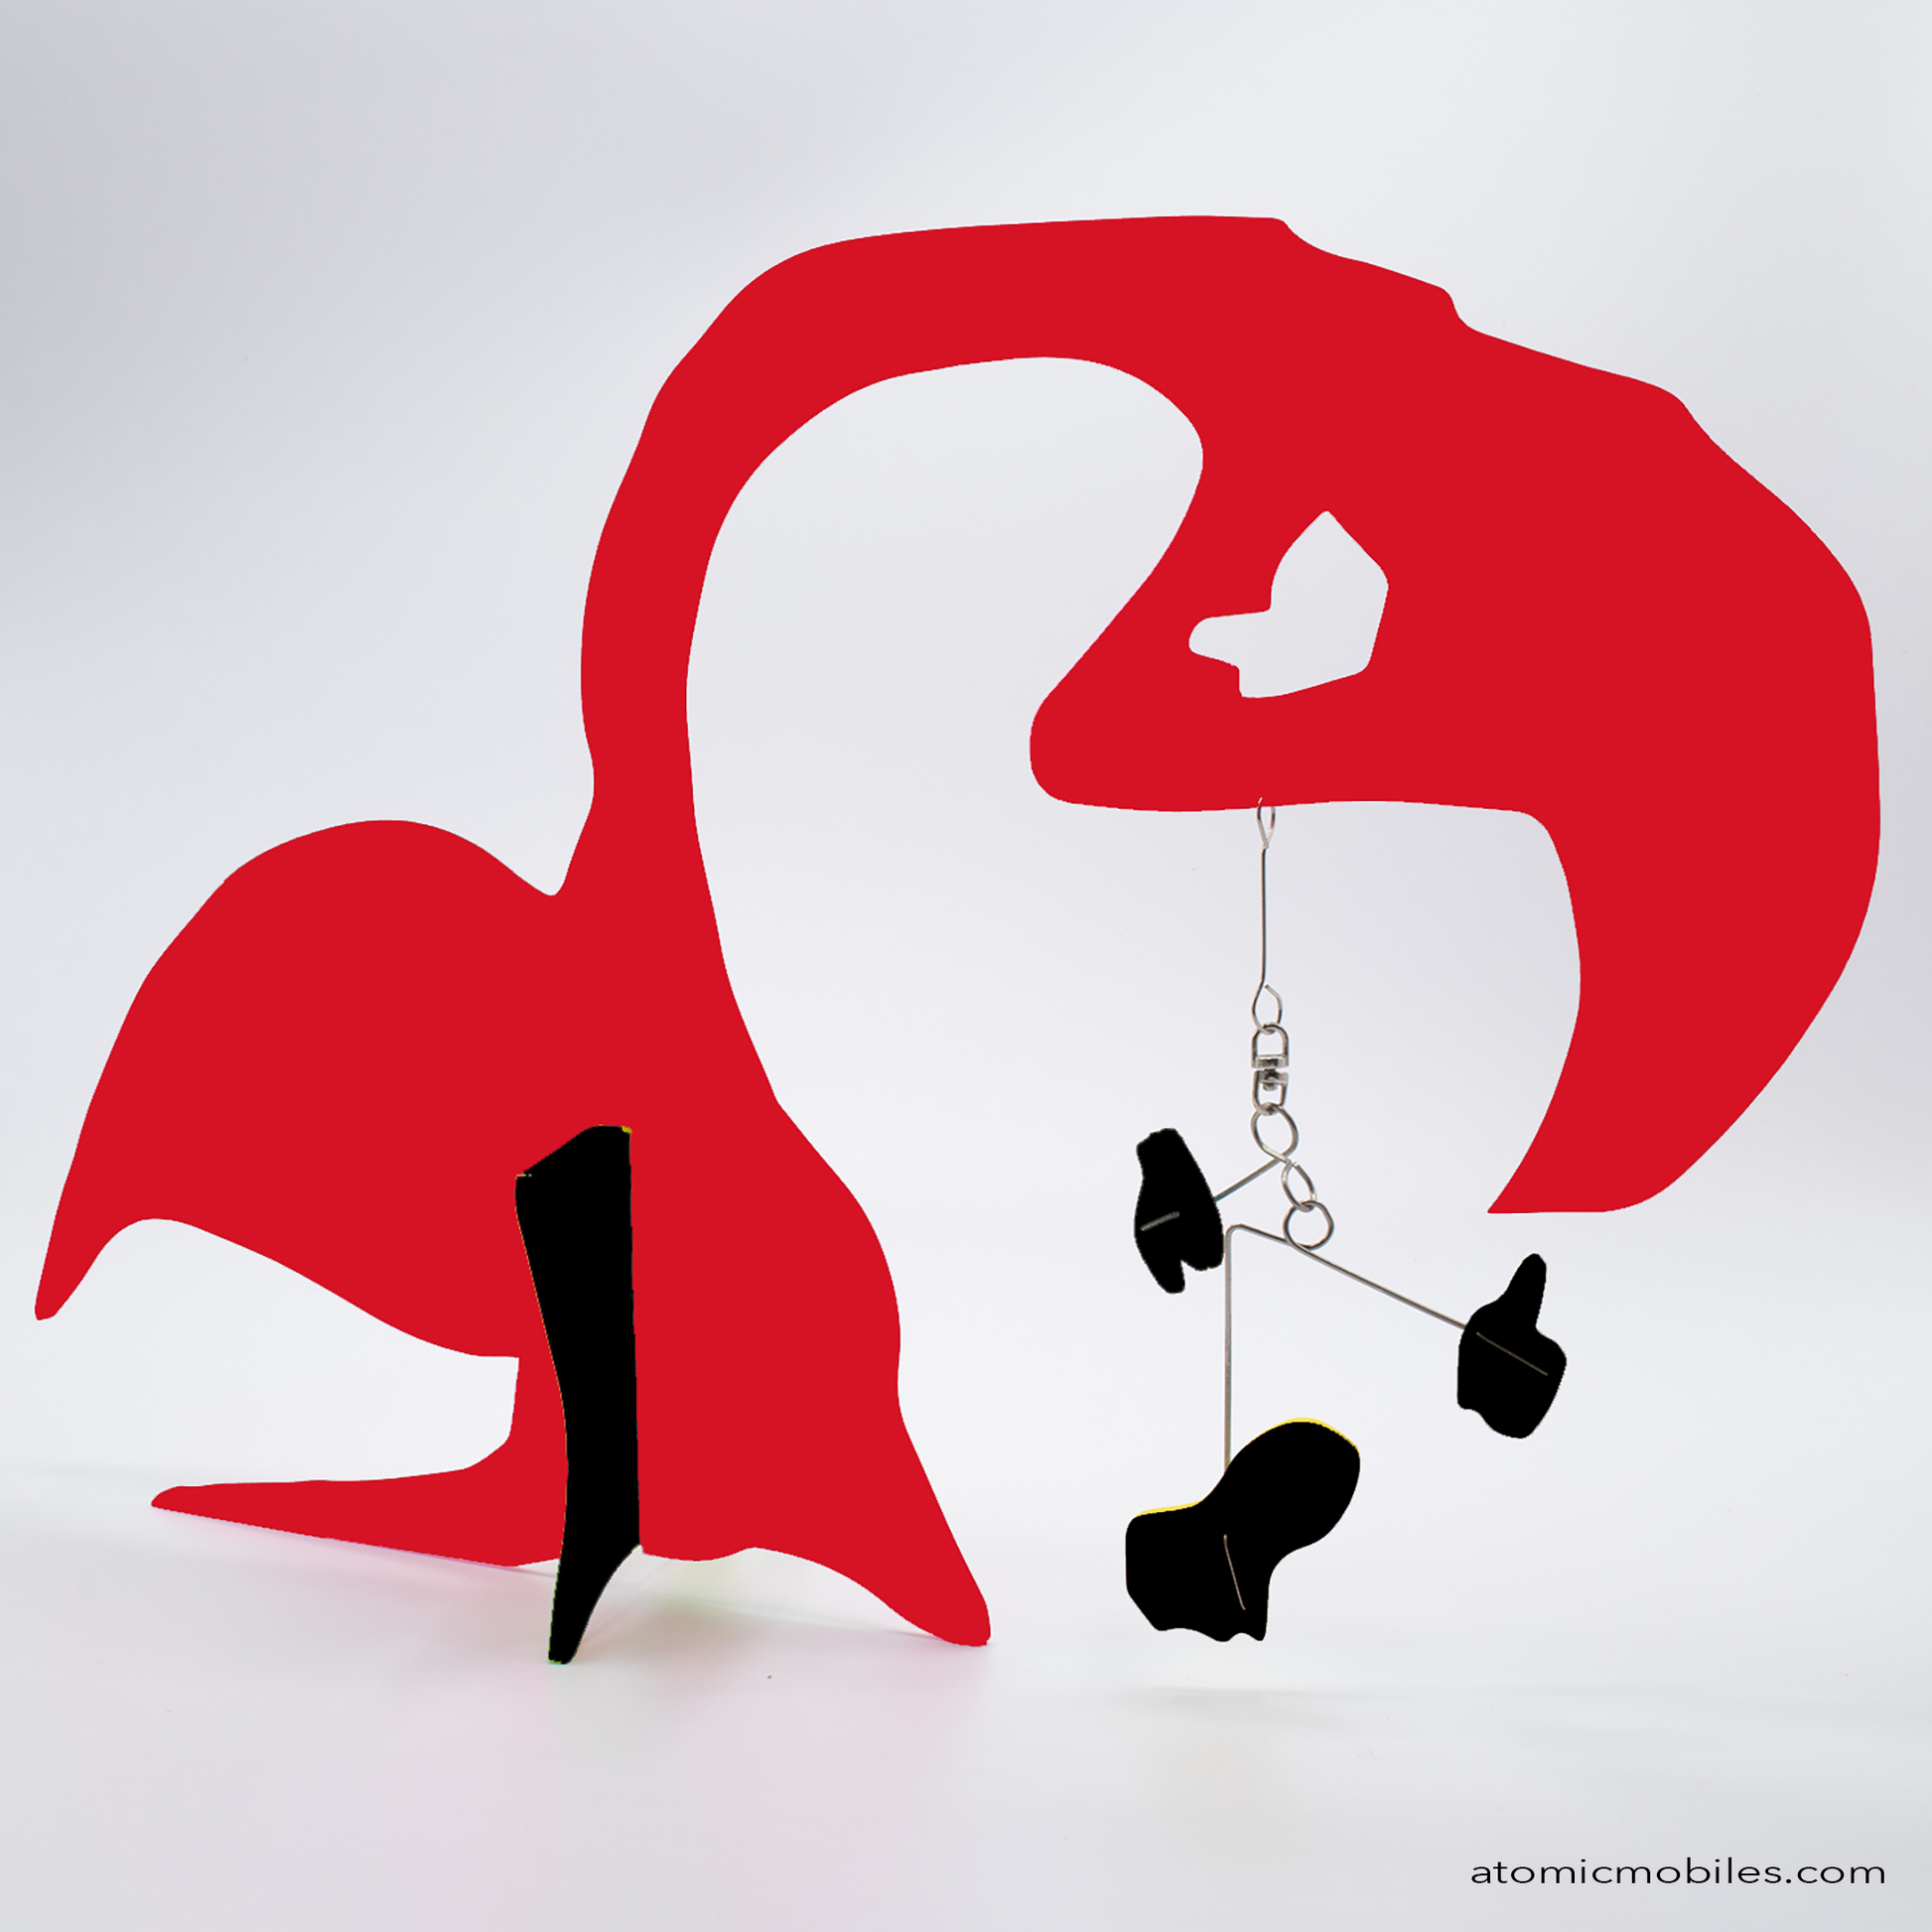 KinetiCats Collection Flamingo in Red and Black - one of 12 Modern Cute Abstract Animal Art Sculpture Kinetic Stabiles inspired by Dada and mid century modern style art by AtomicMobiles.com